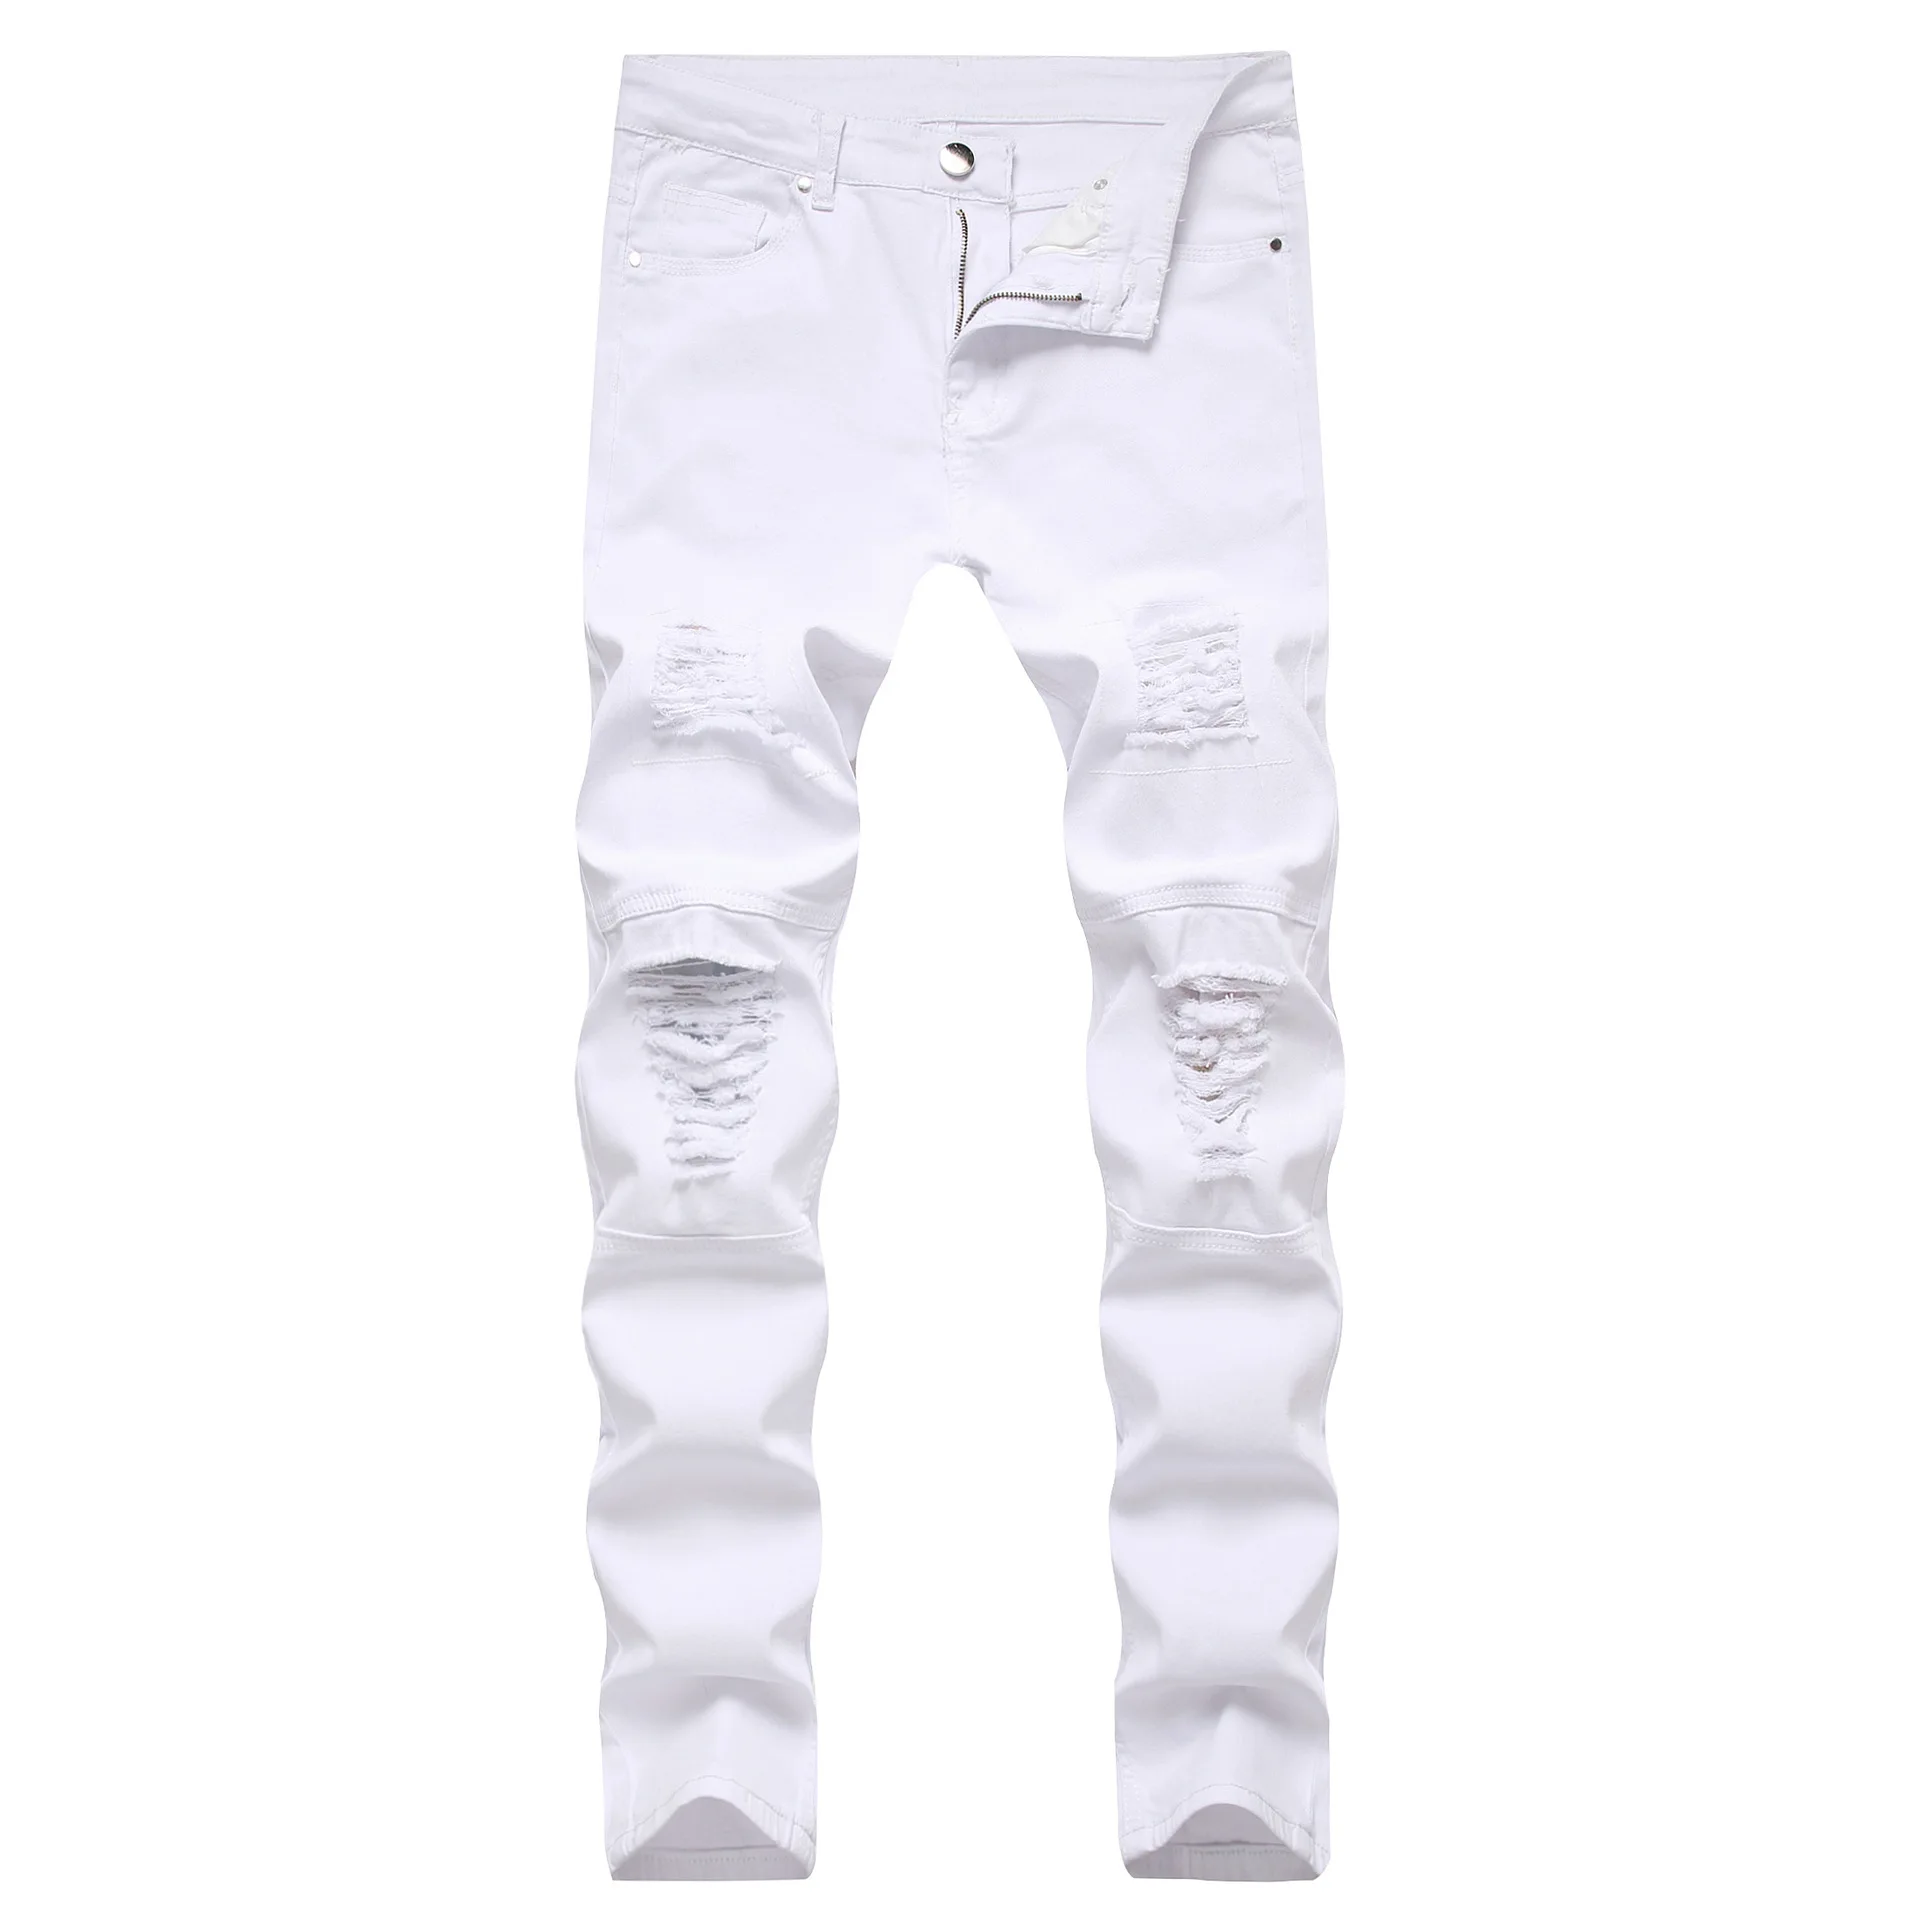 slachtoffers Classificatie Agnes Gray New Designer Men's Jeans Straight Slim Fit Pants Streetwear White Fitting  Washed Stretch Men Jeans - Buy Jeans Pants Men 2021,Men Skinny Fit Jeans,Skinny  Jeans For Men Product on Alibaba.com